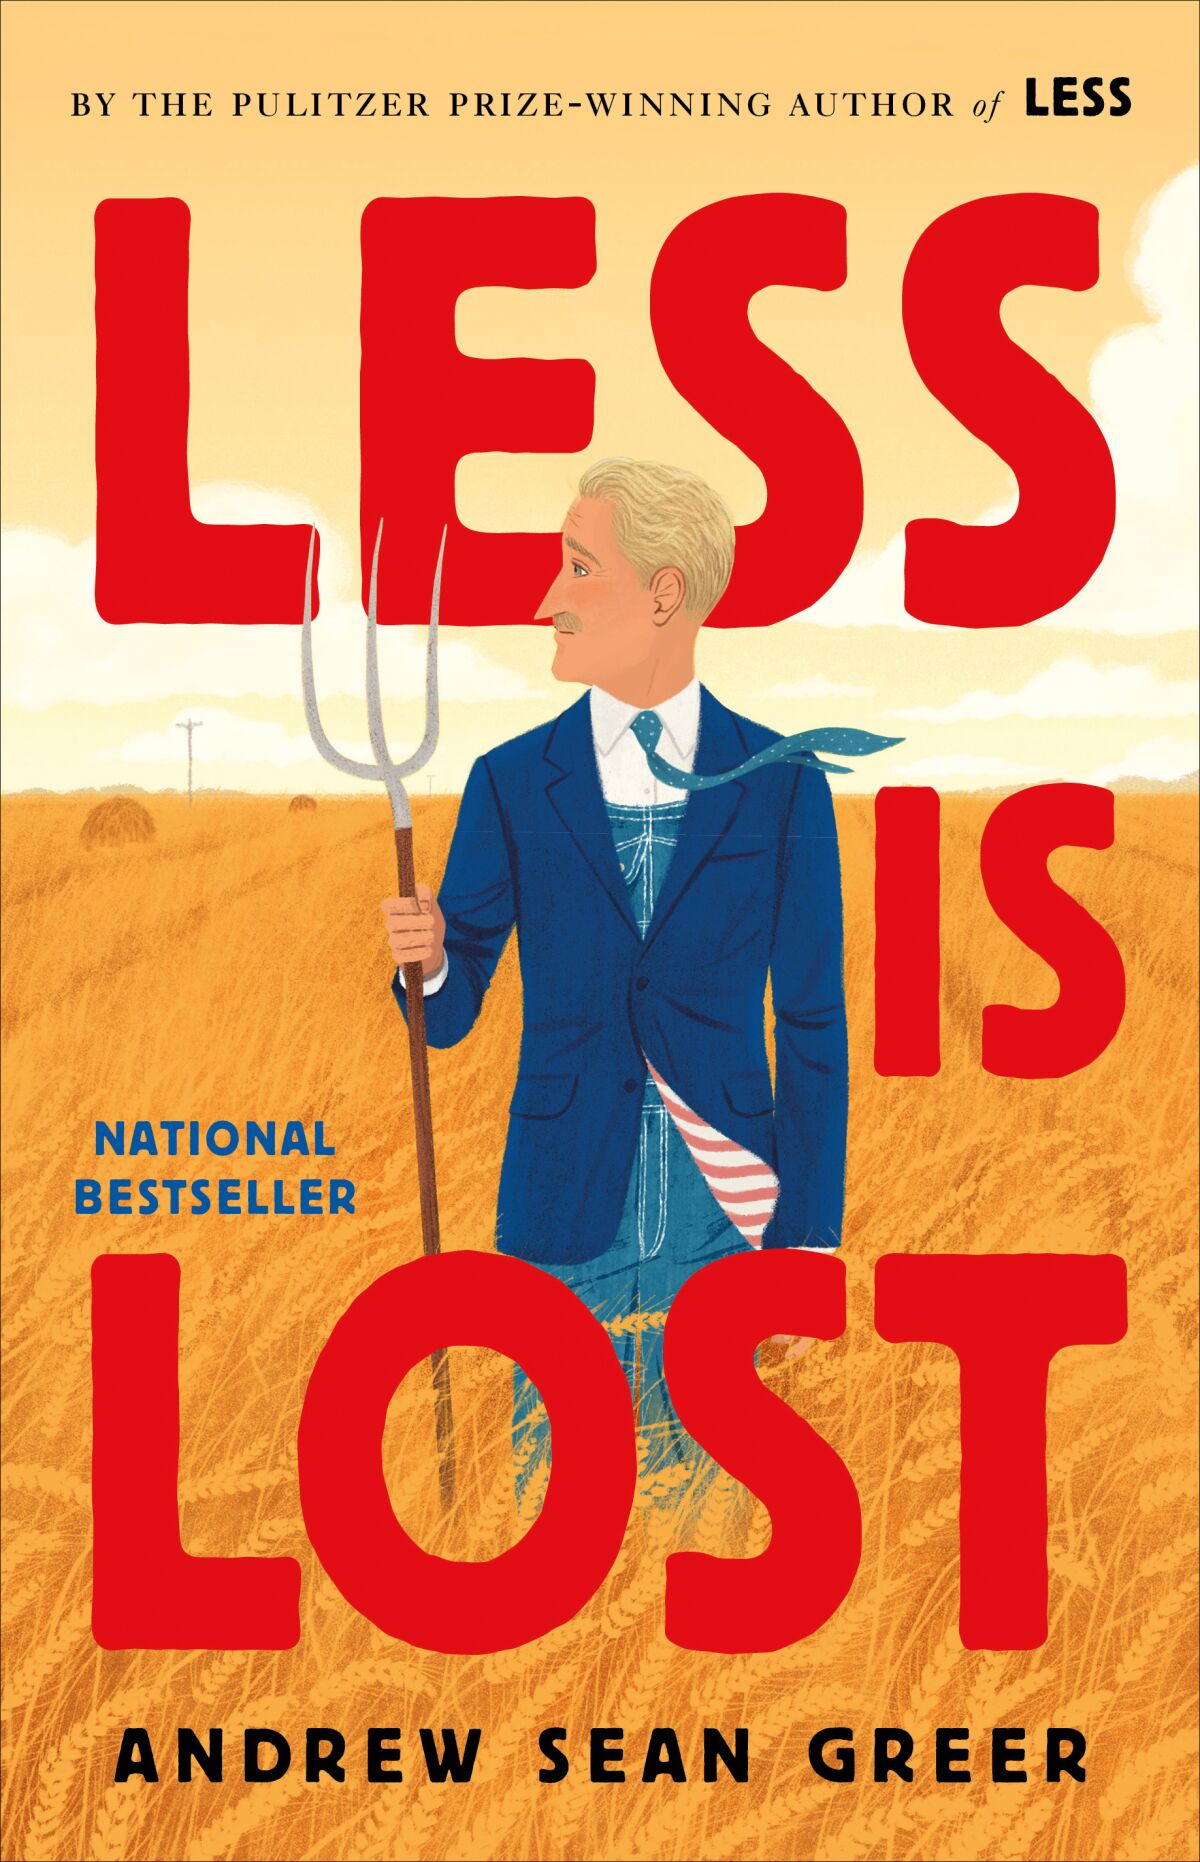 "Less is lost" by Andrew Sean Greer